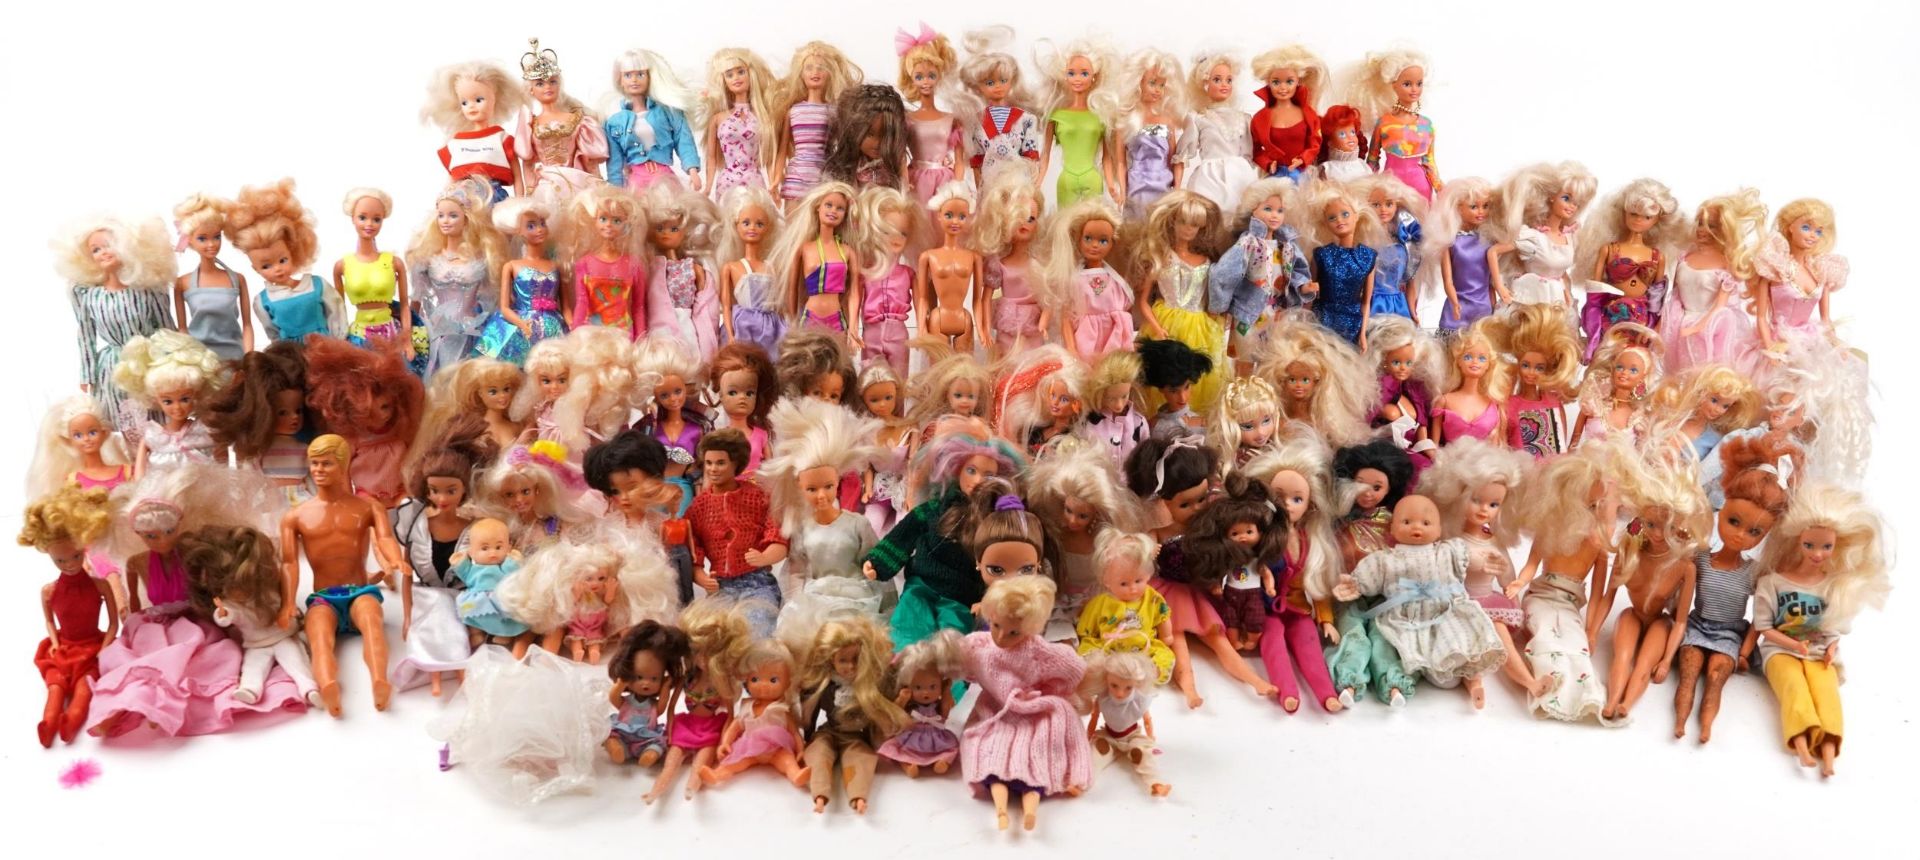 Extensive collection of vintage and later dolls and action figures, predominantly Sindy, Barbie